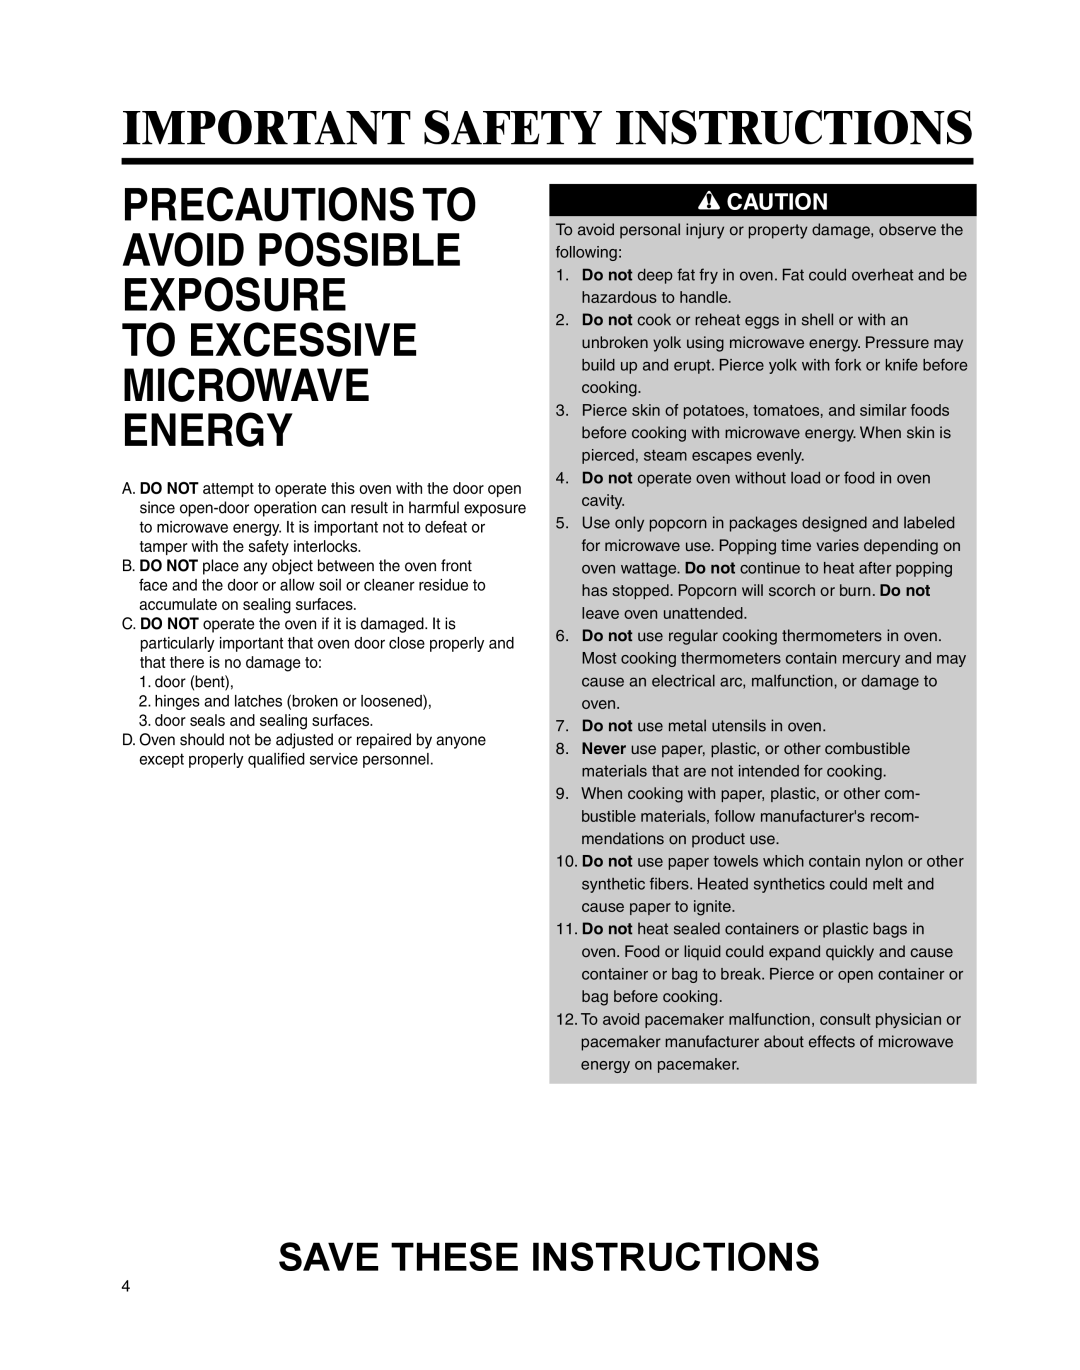 Maytag UMC5200BCS Precautions To Avoid Possible Exposure, Microwave Energy, Important Safety Instructions, To Excessive 